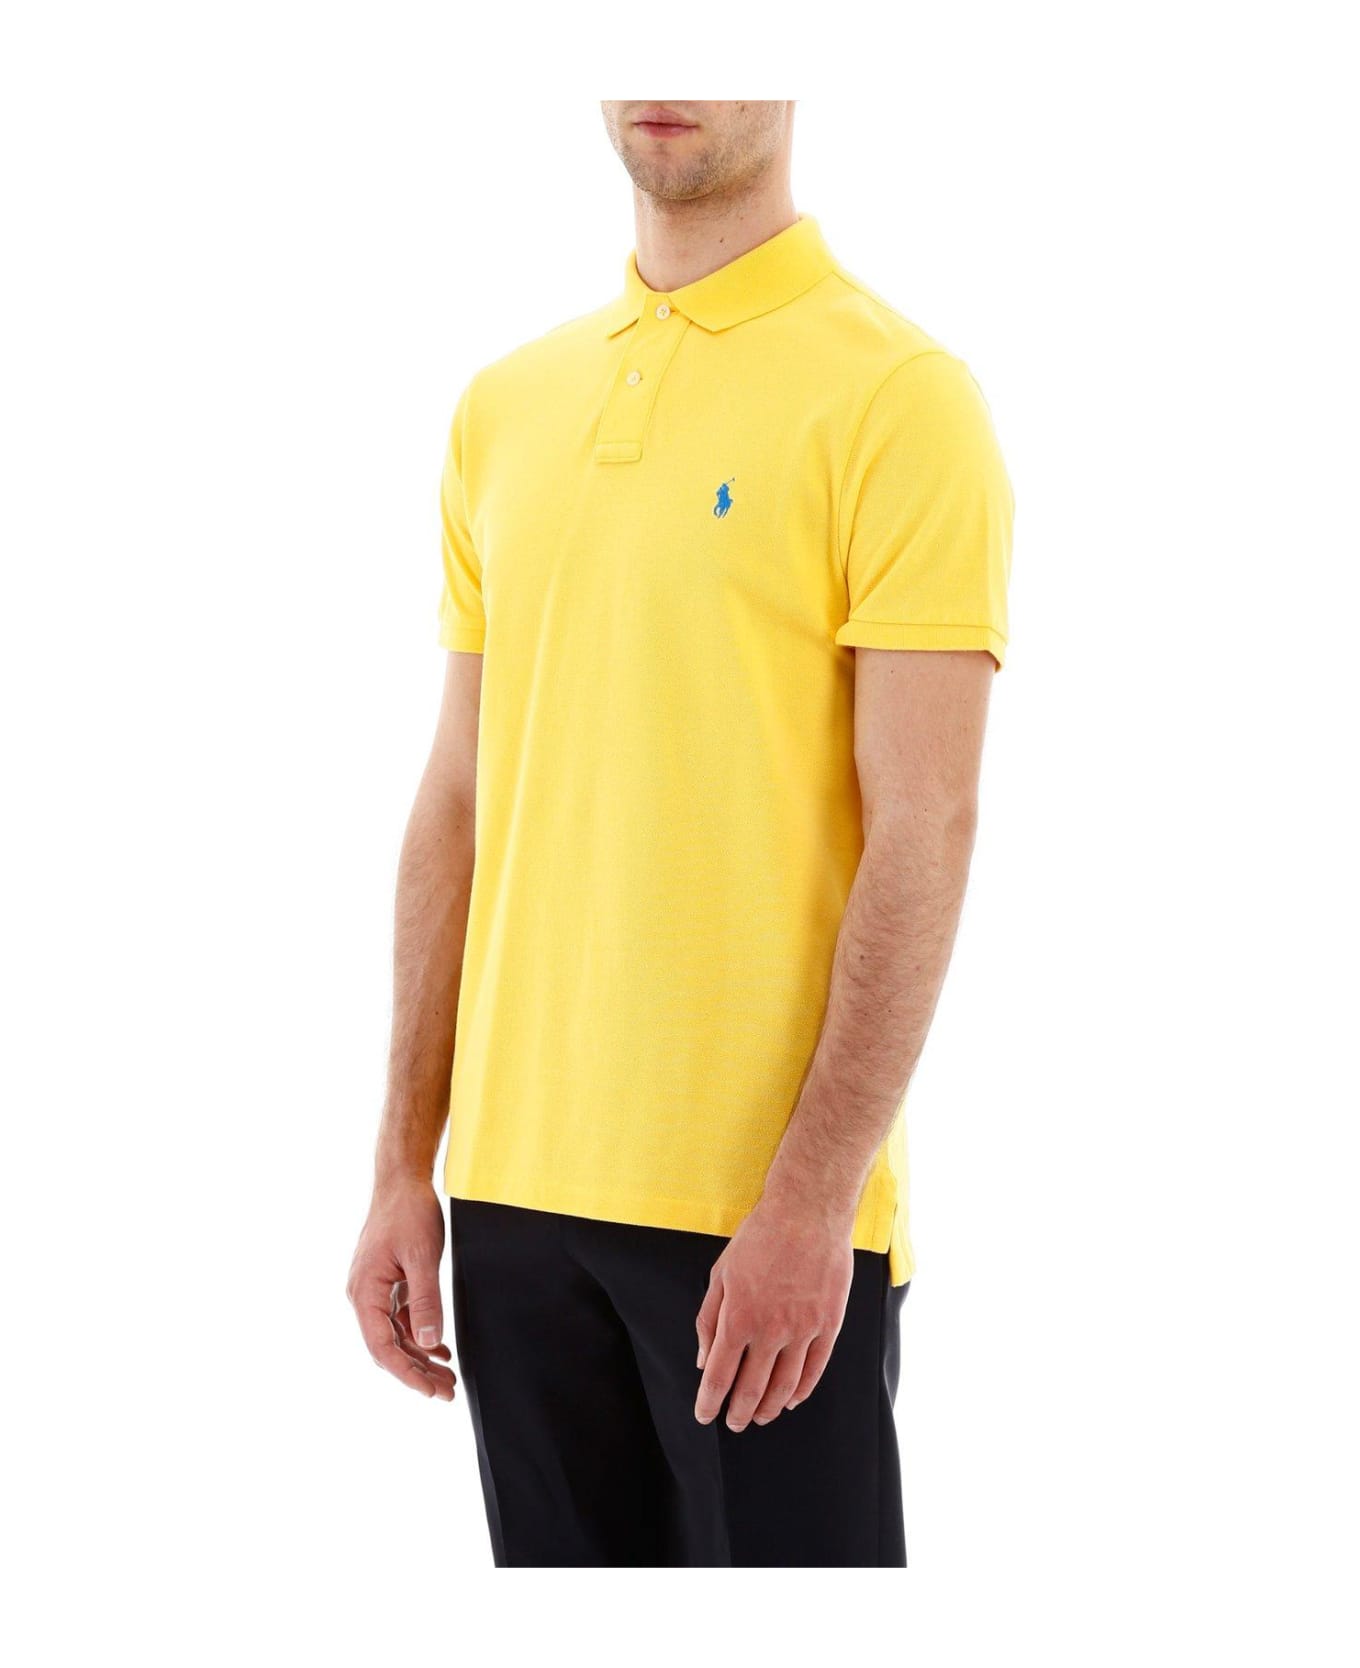 Ralph Lauren Oasis Yellow And Blue Slim-fit Piquet Polo Shirt - Yellow